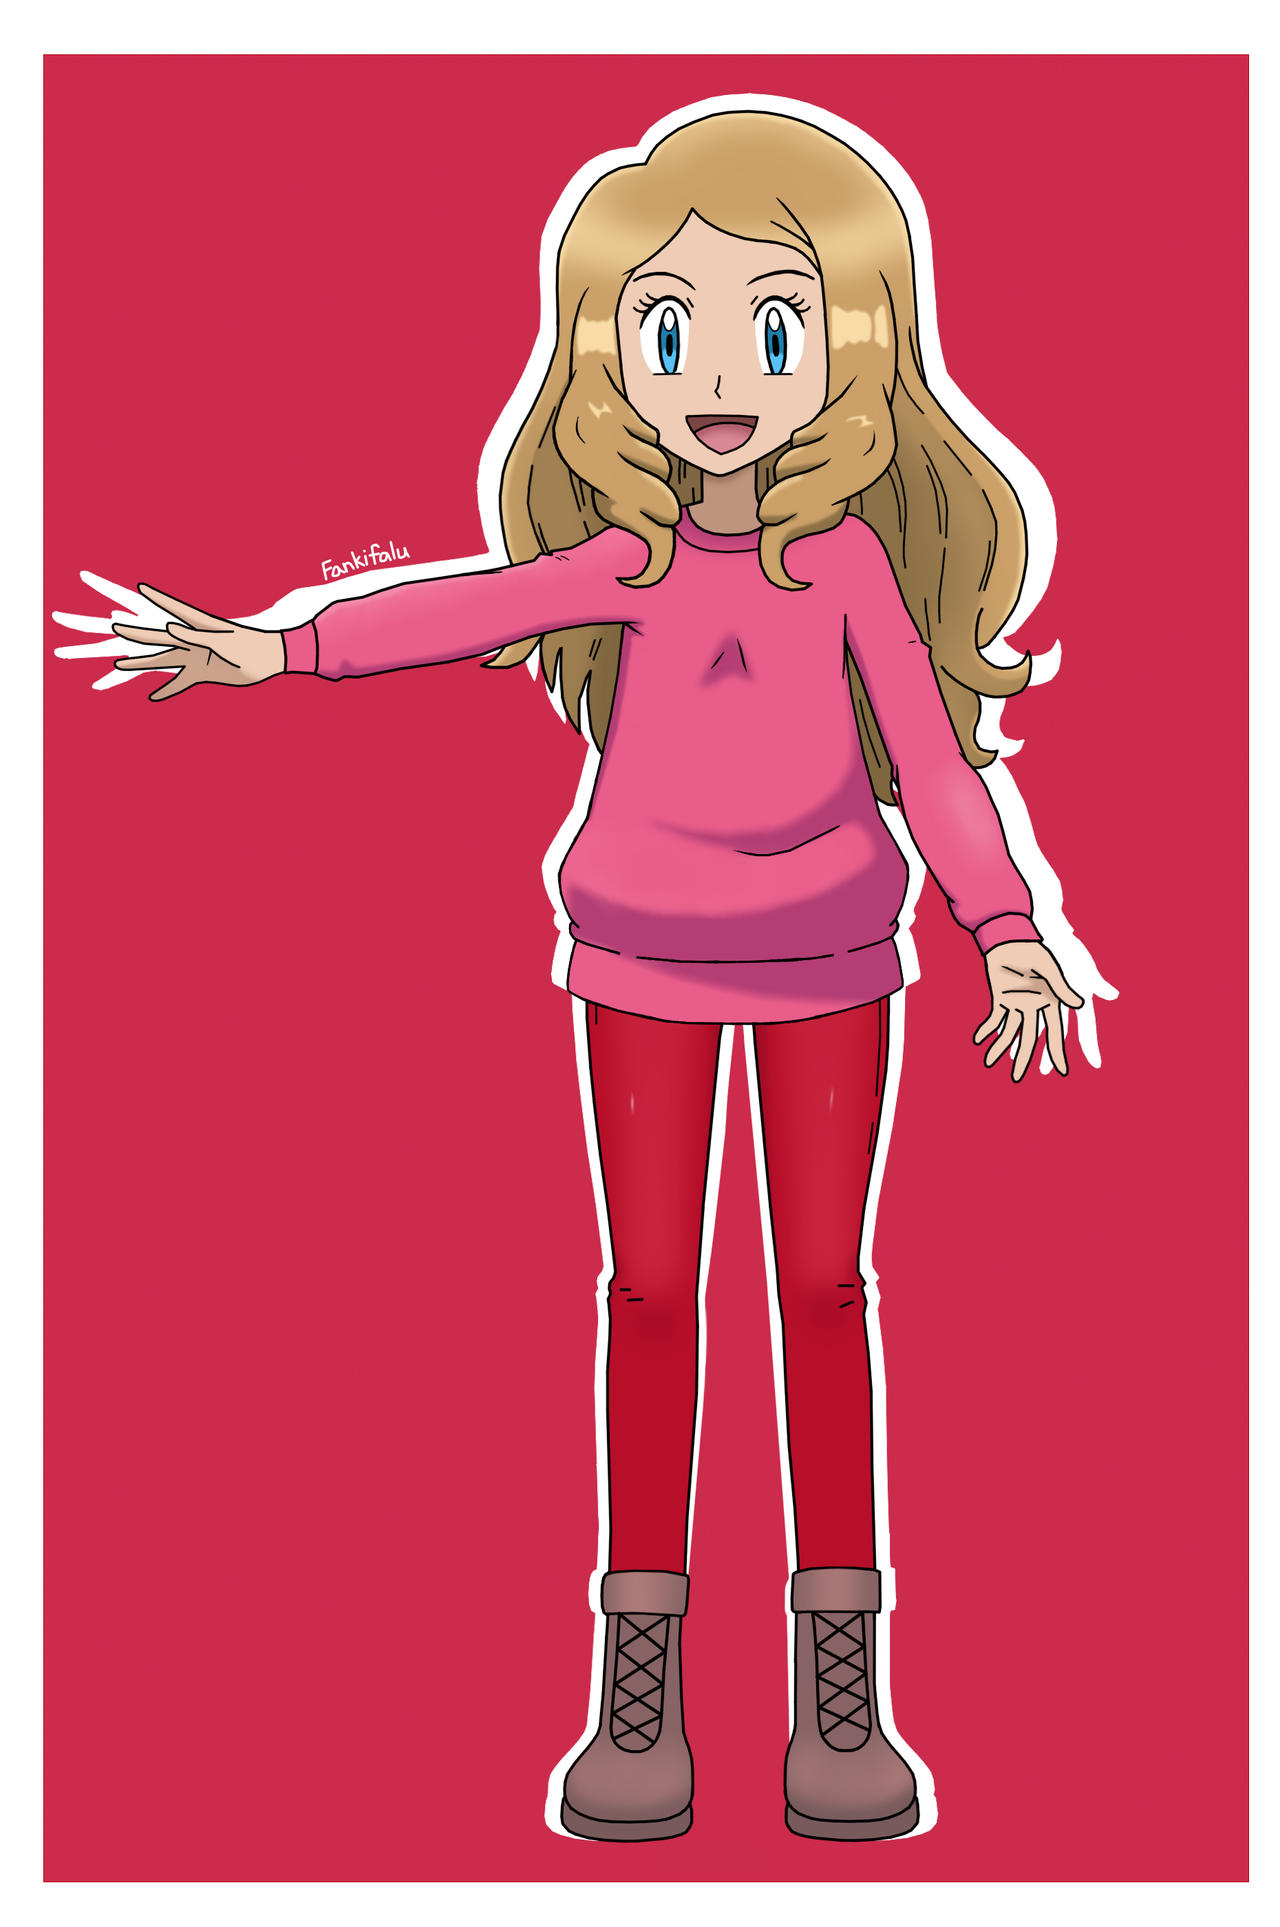 Pokemon Trainer Serena (Contest Outfit) by FankiFalu on DeviantArt